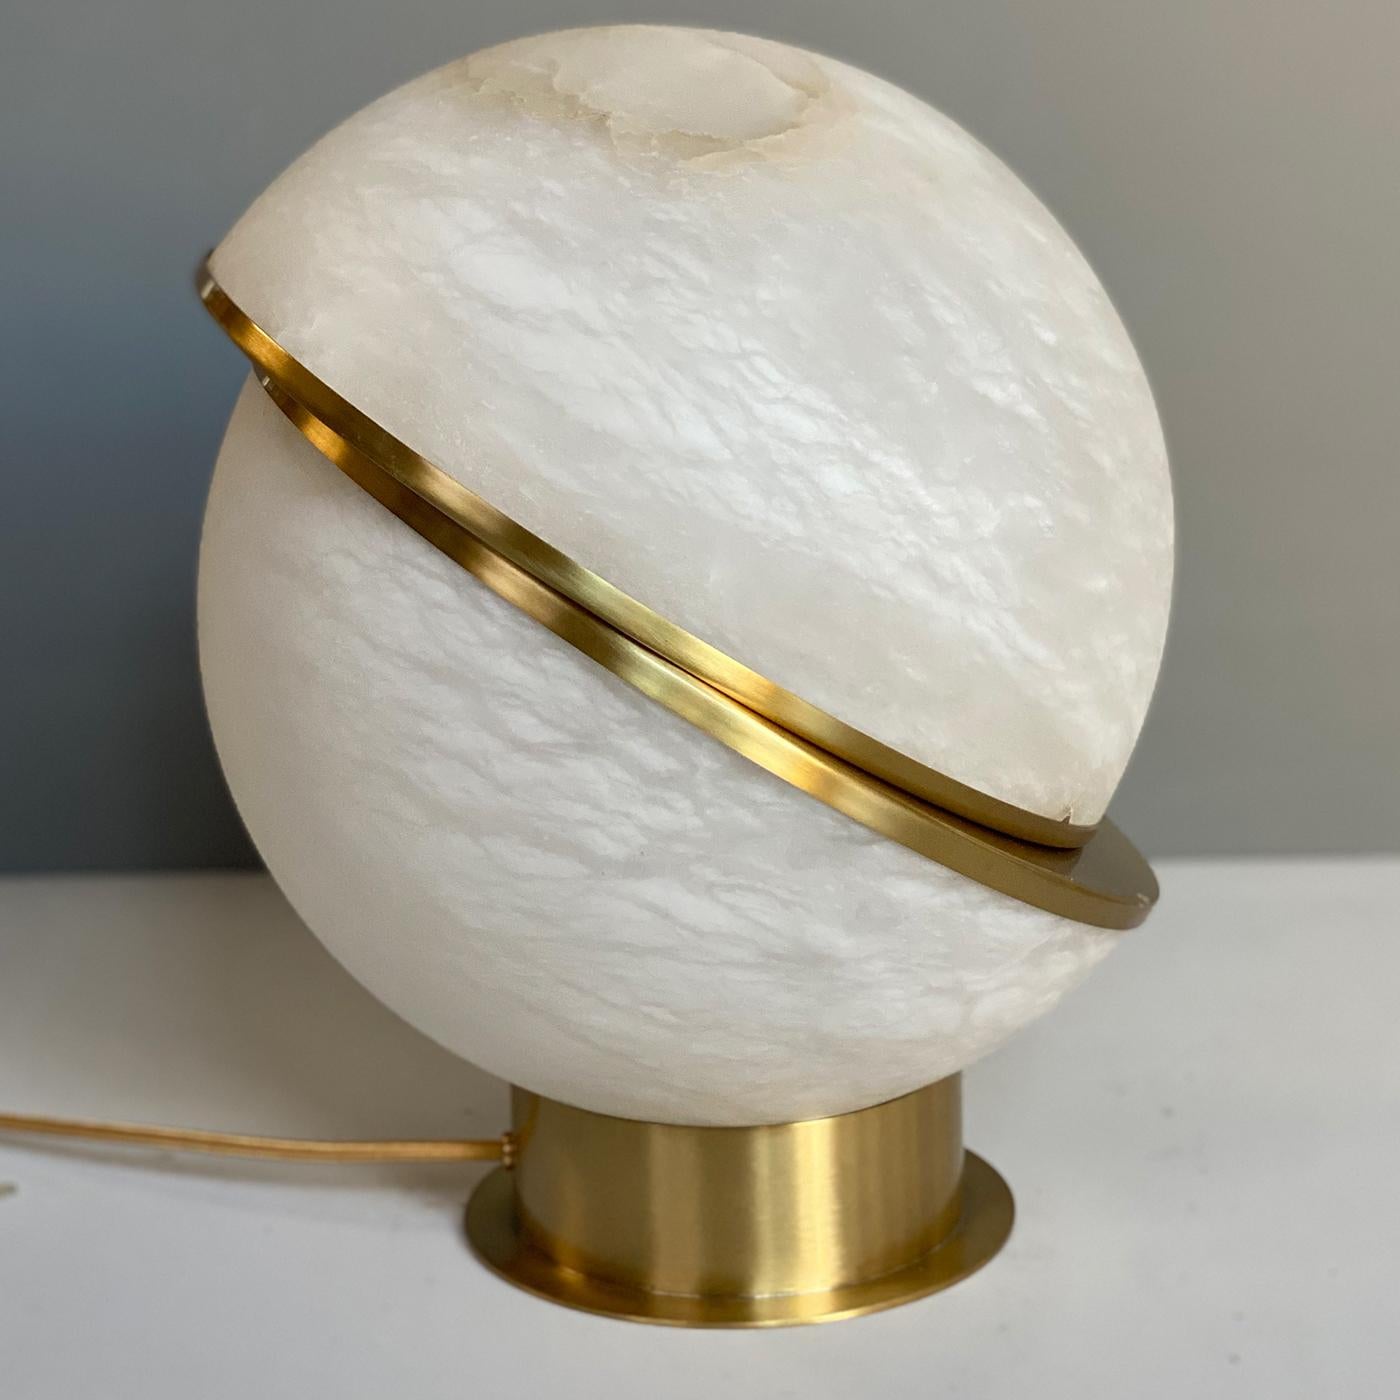 The Alabaster Globe is a table lamp composed of two half-spheres in alabaster held together by a thin brass contour. Combining the ethereal allure of alabaster stone and the warm reflection of brass, this lamp is a stunning complement to a refined